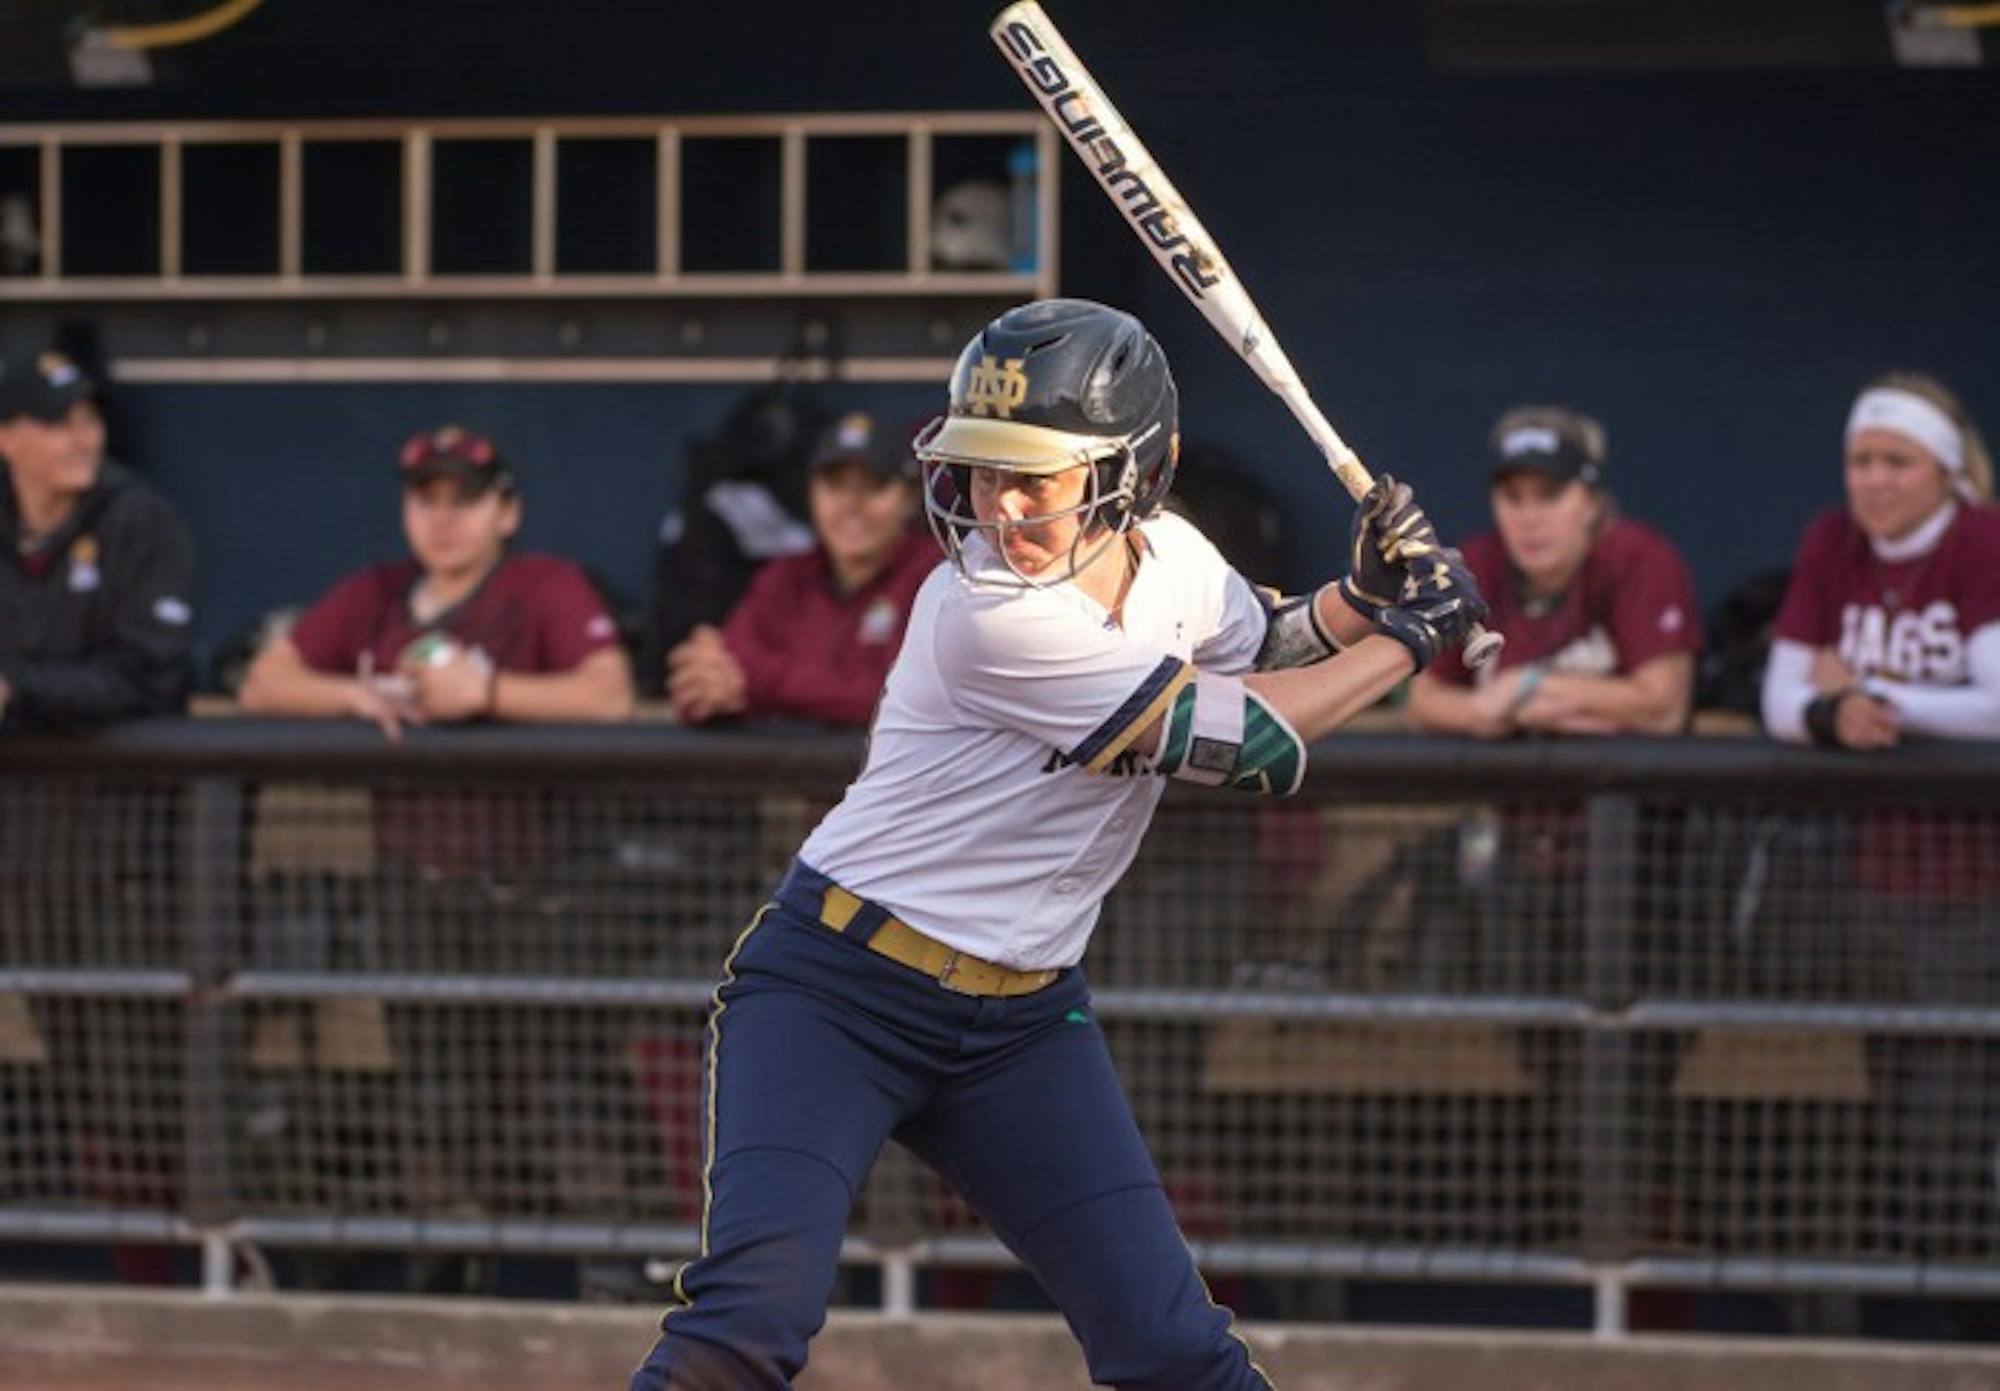 Irish junior shortstop Morgan Reed awaits a pitch during Notre Dame's 13-4 win over IUPUI on April 12 at Melissa Cook Stadium.